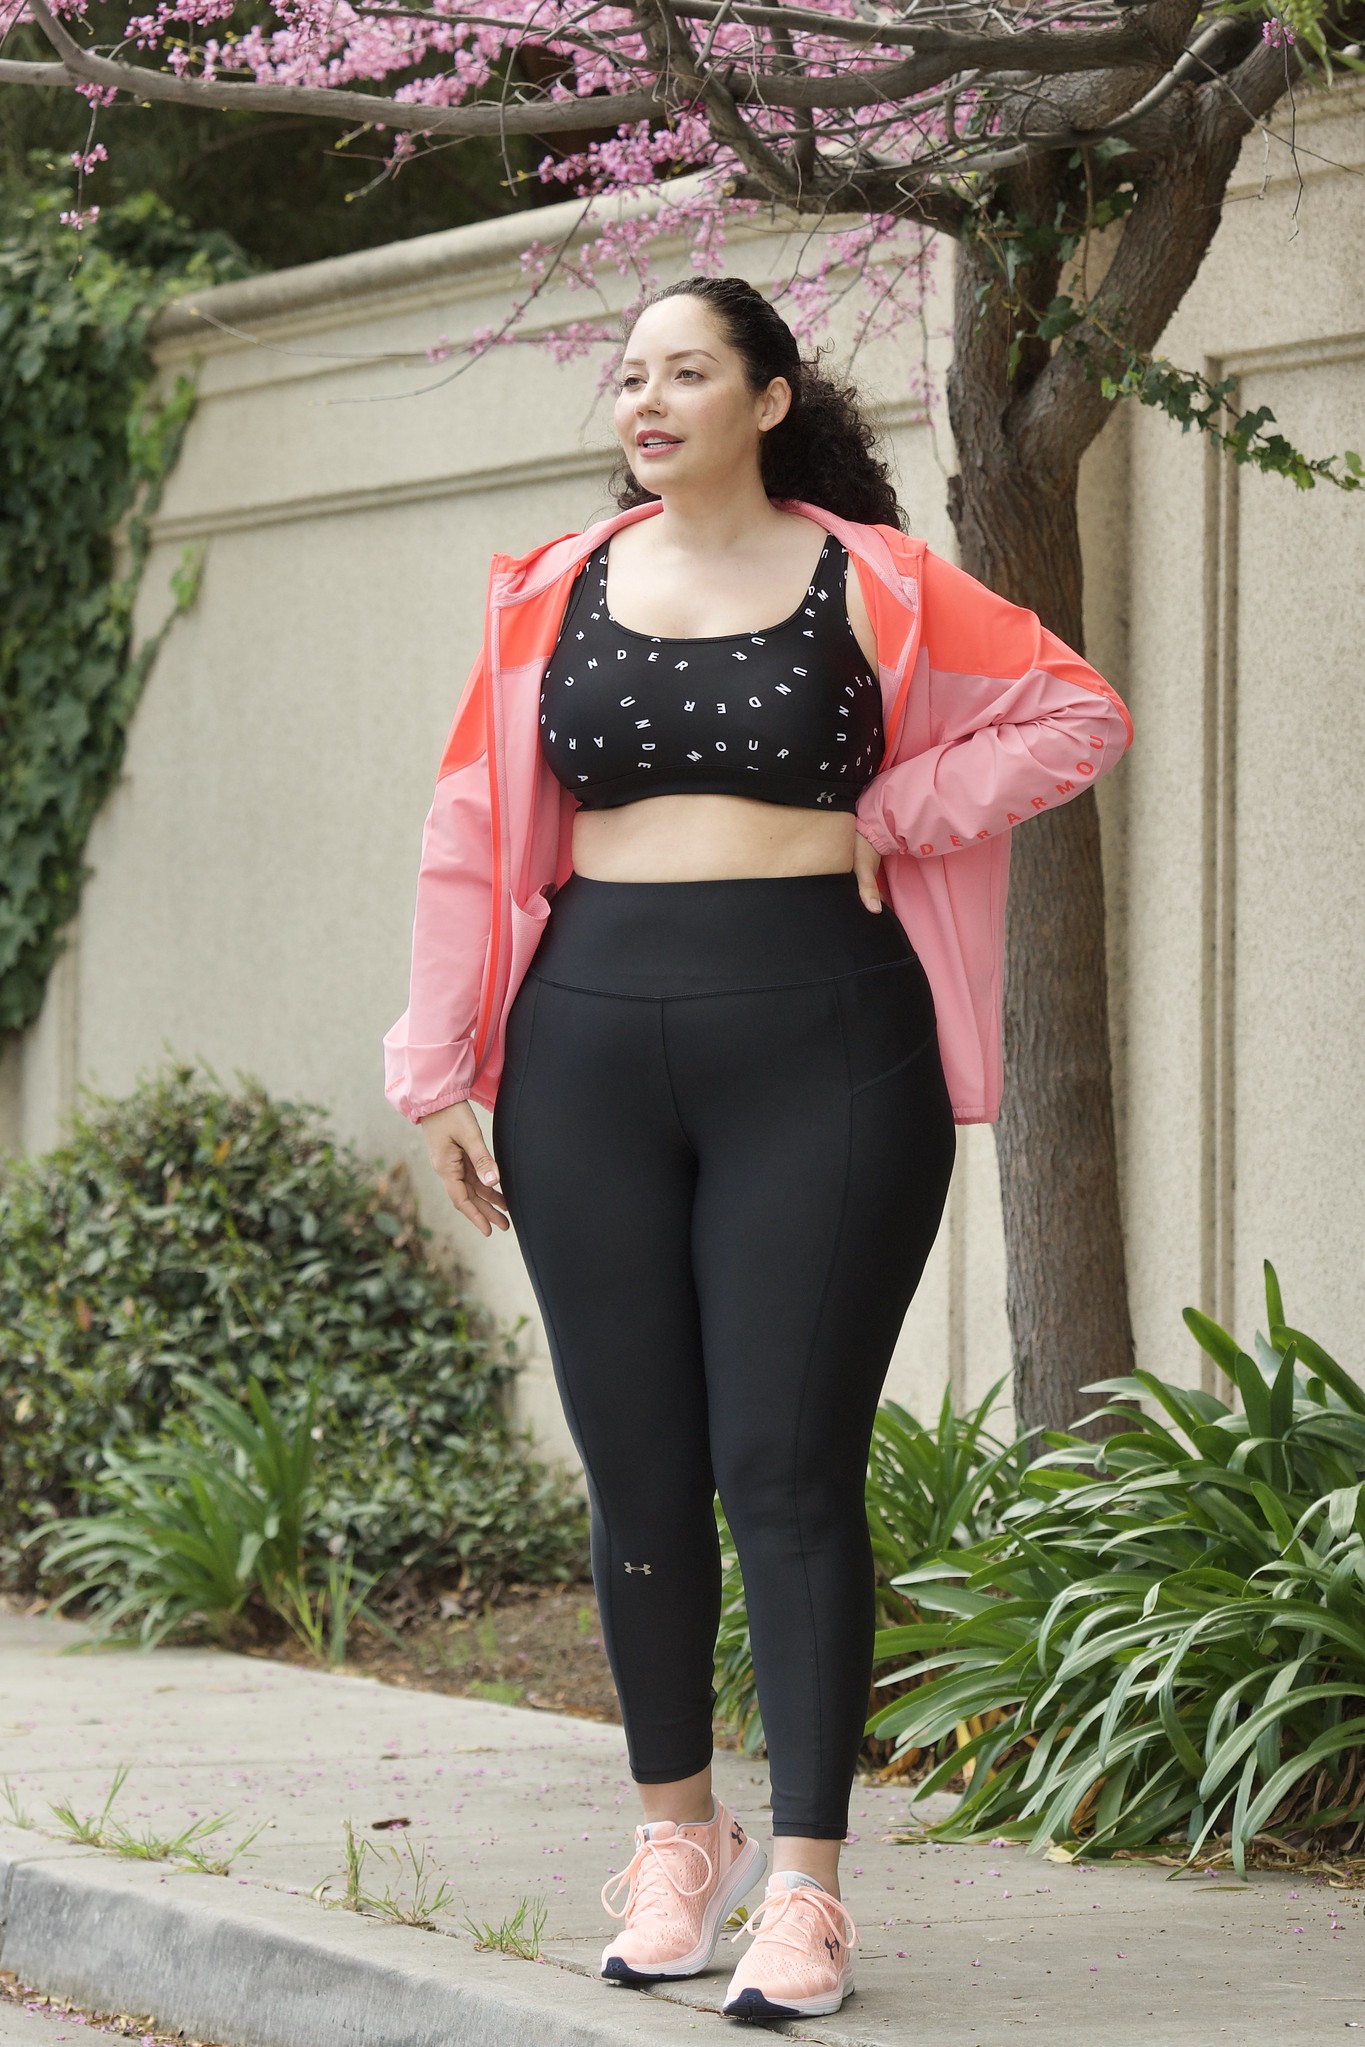 3 Must-Have Legging Styles via Girl With Curves #bodypositive #curvyfashion #plussize #leggings